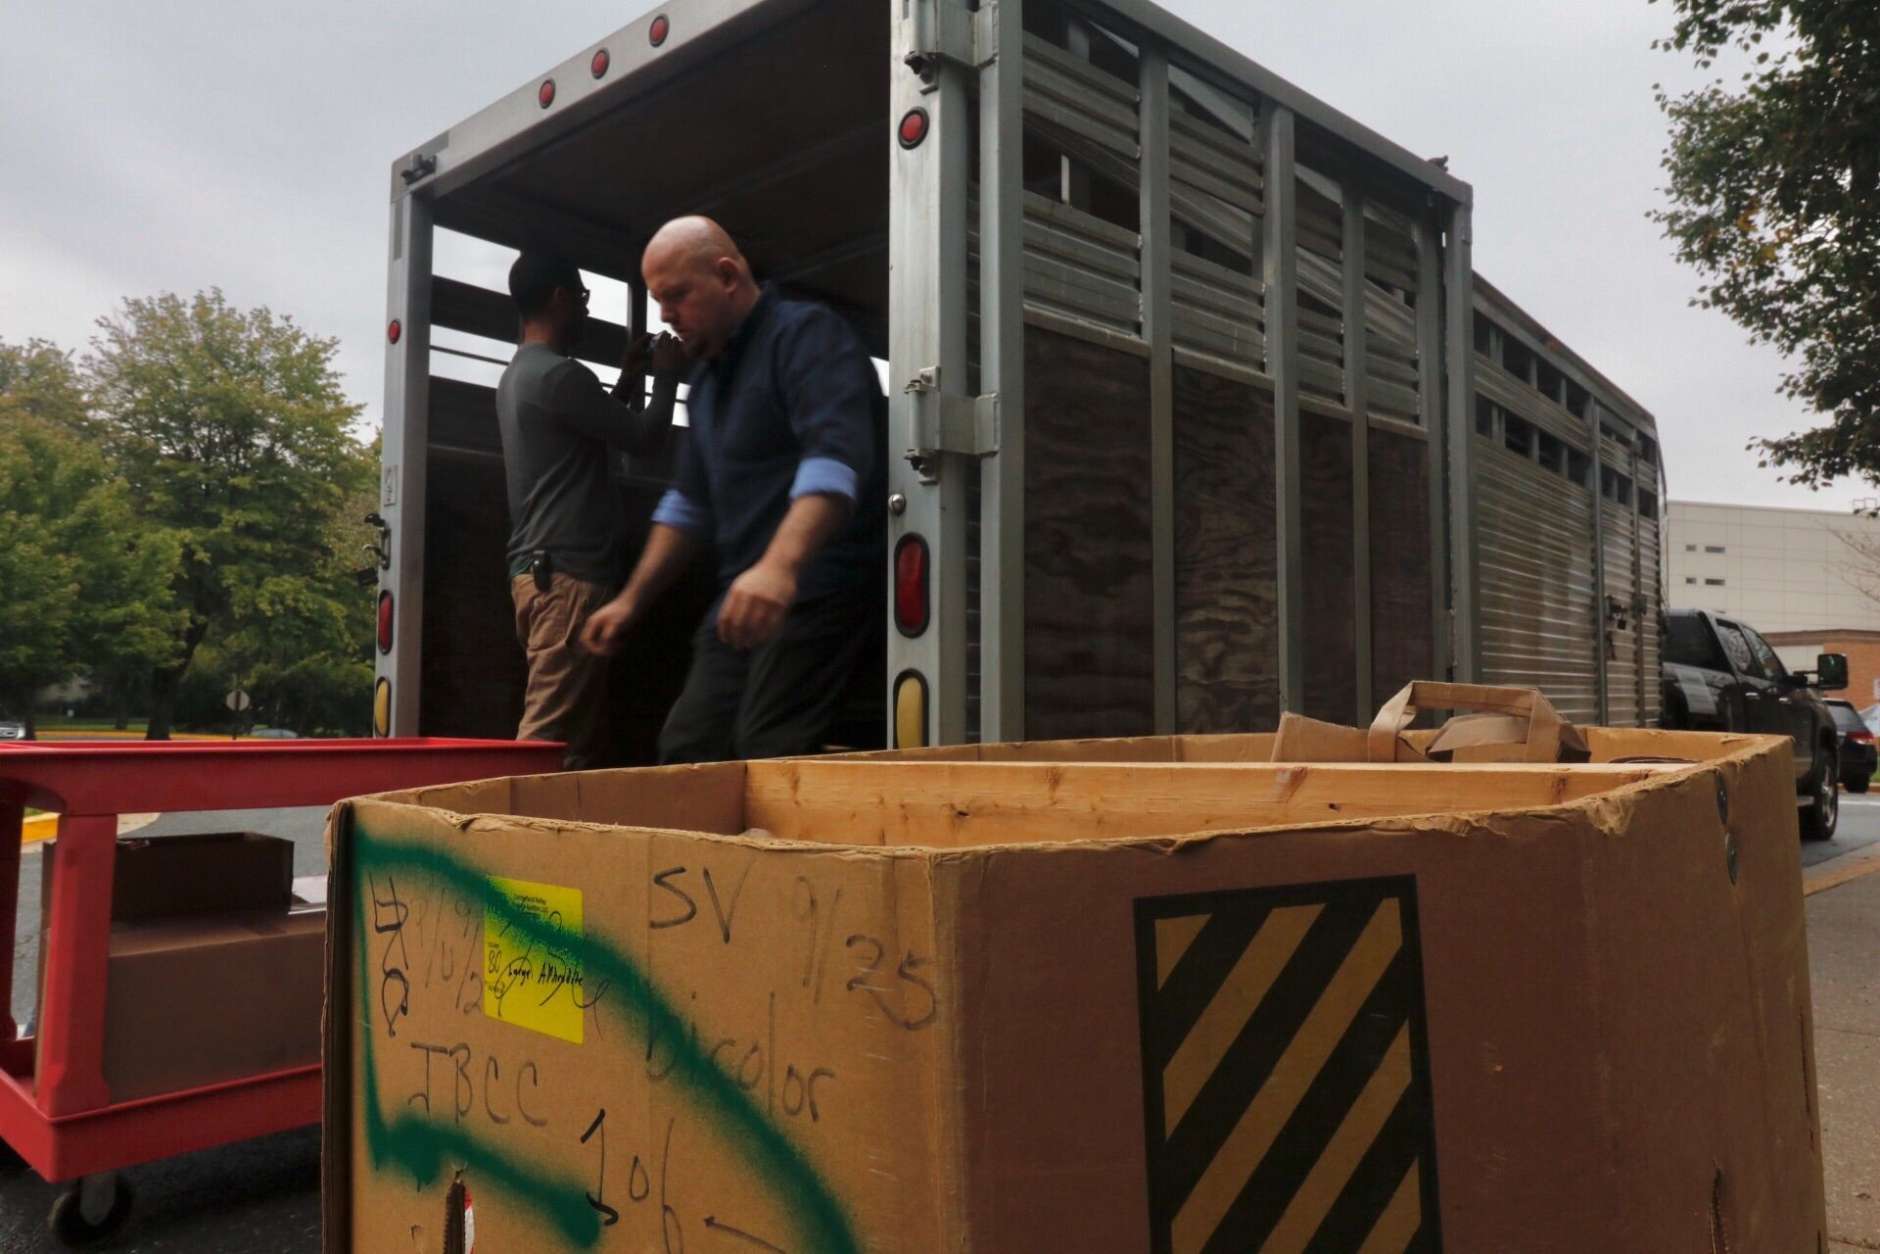 The borrowed trailer is packed with food, diapers and other goods, which were collected by congregants at the Washington Hebrew Congregation in Potomac, Maryland. (WTOP/Kate Ryan)